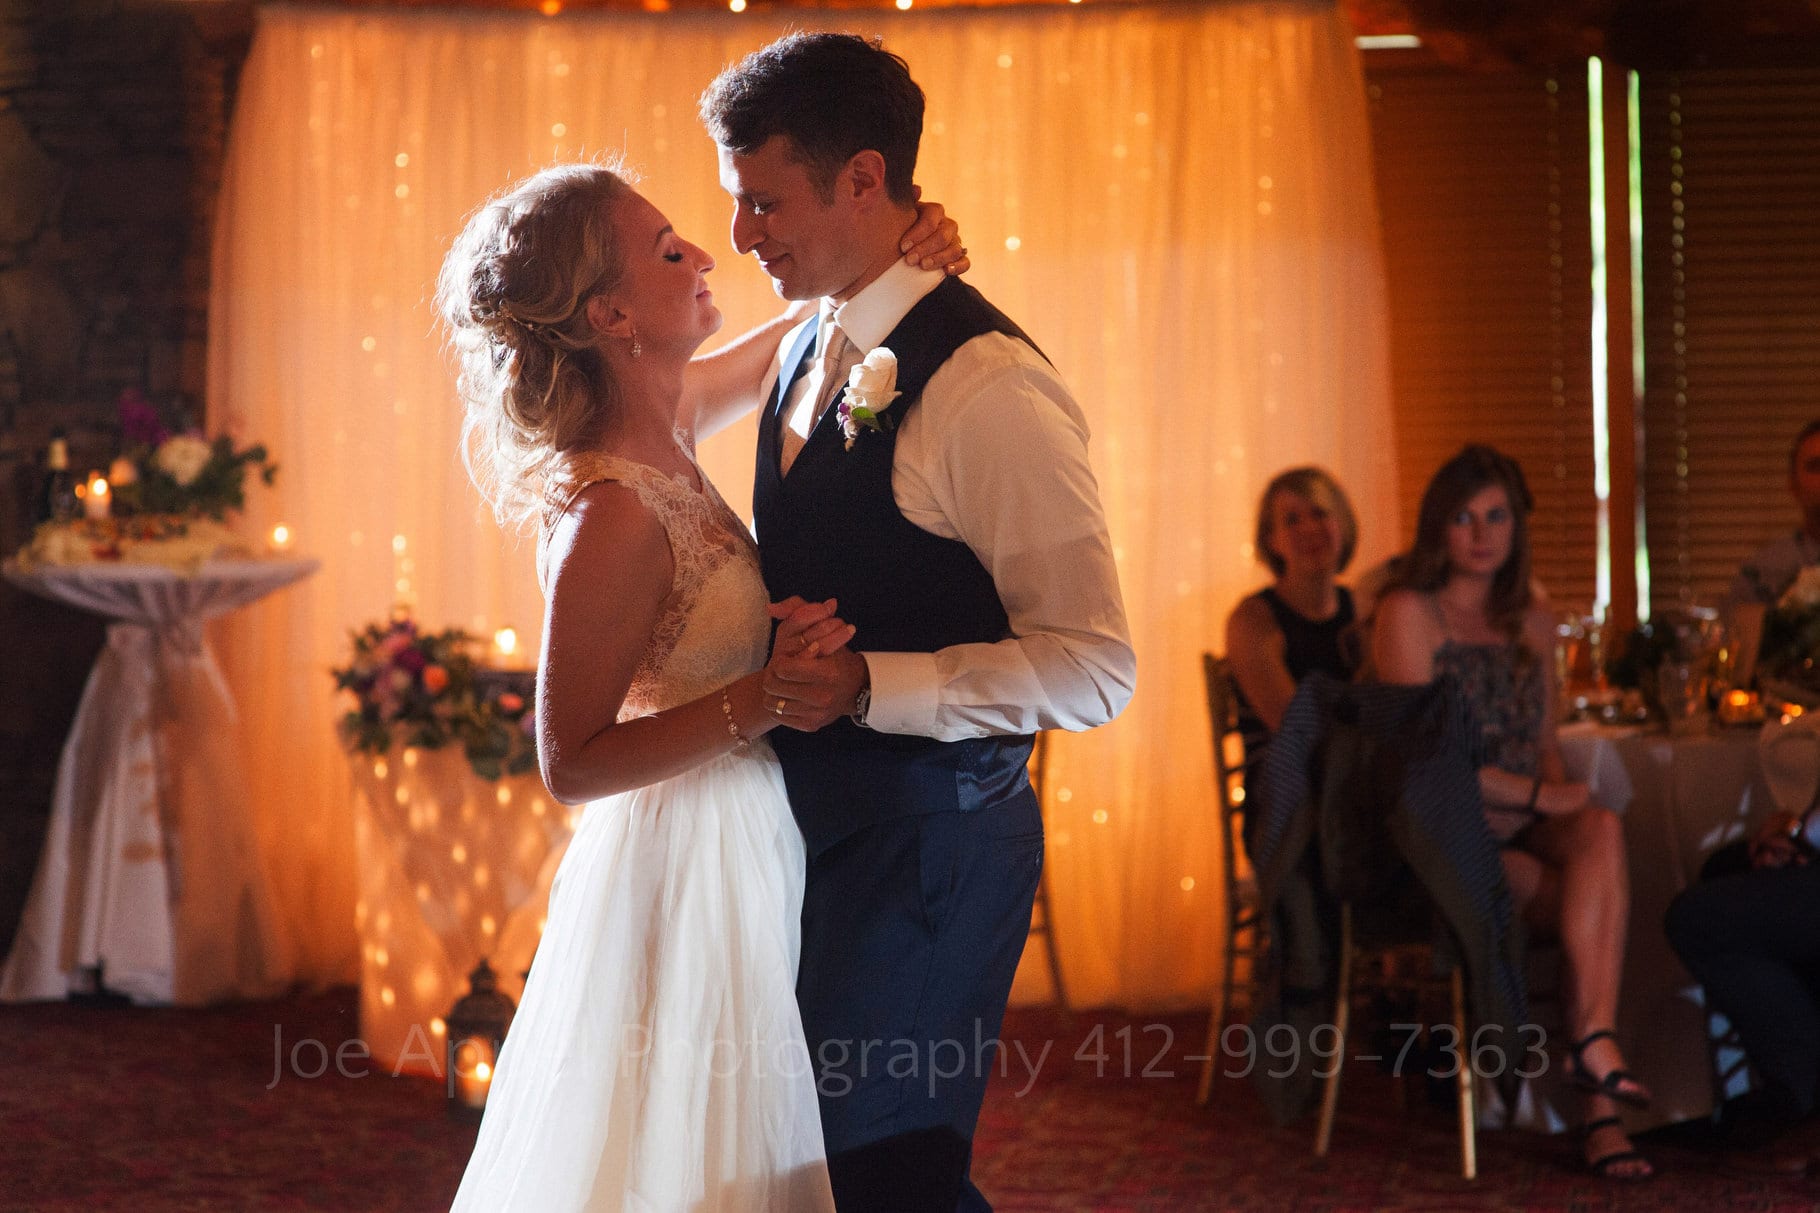 A bride and groom have their first dance in front of a warm, glowing curtain in a ballroom during their Seven Springs Wedding.